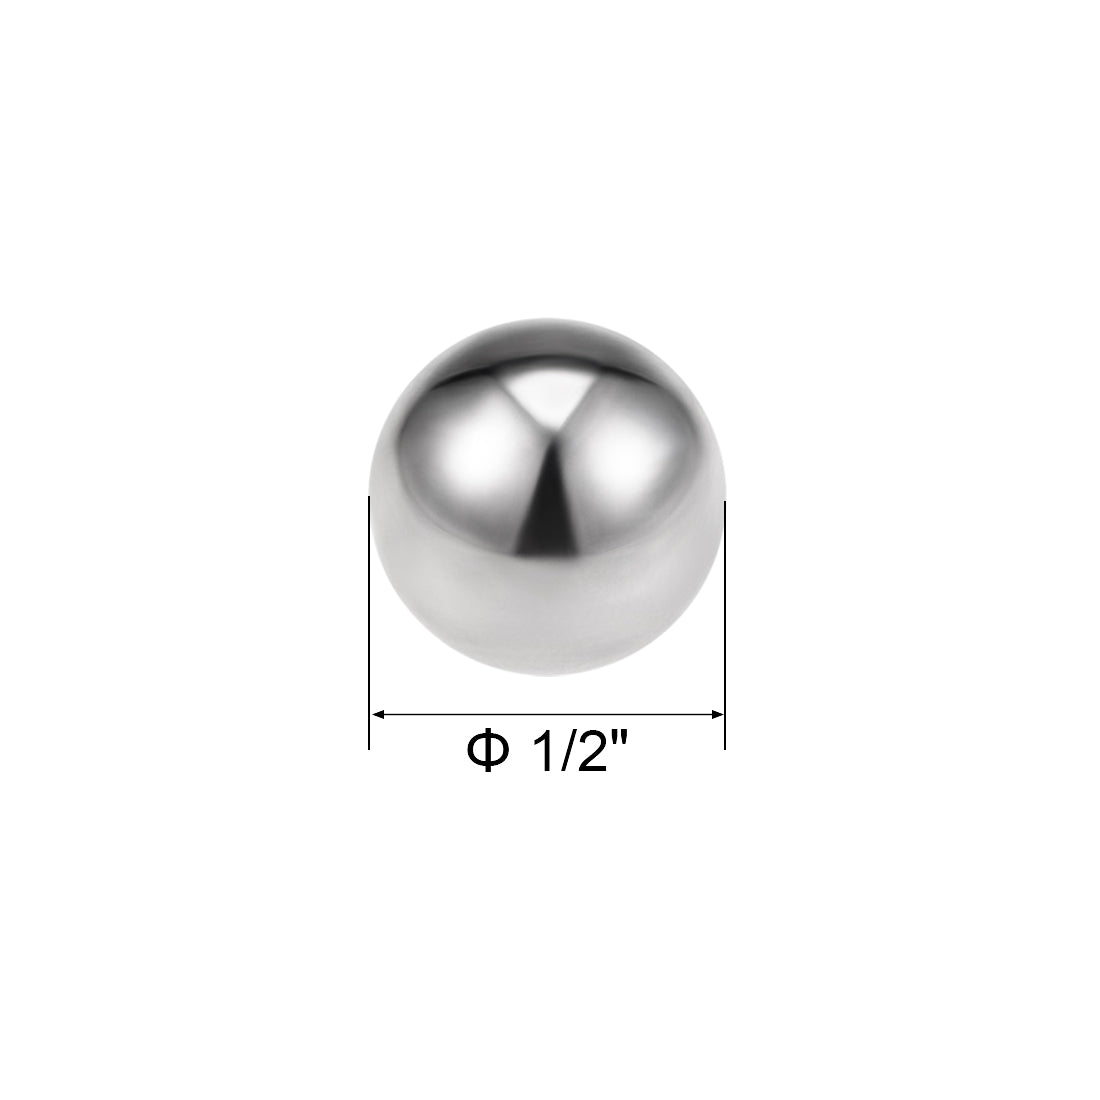 Uxcell Uxcell 5/8" Bearing Balls 440C Stainless Steel G25 Precision Balls 5pcs